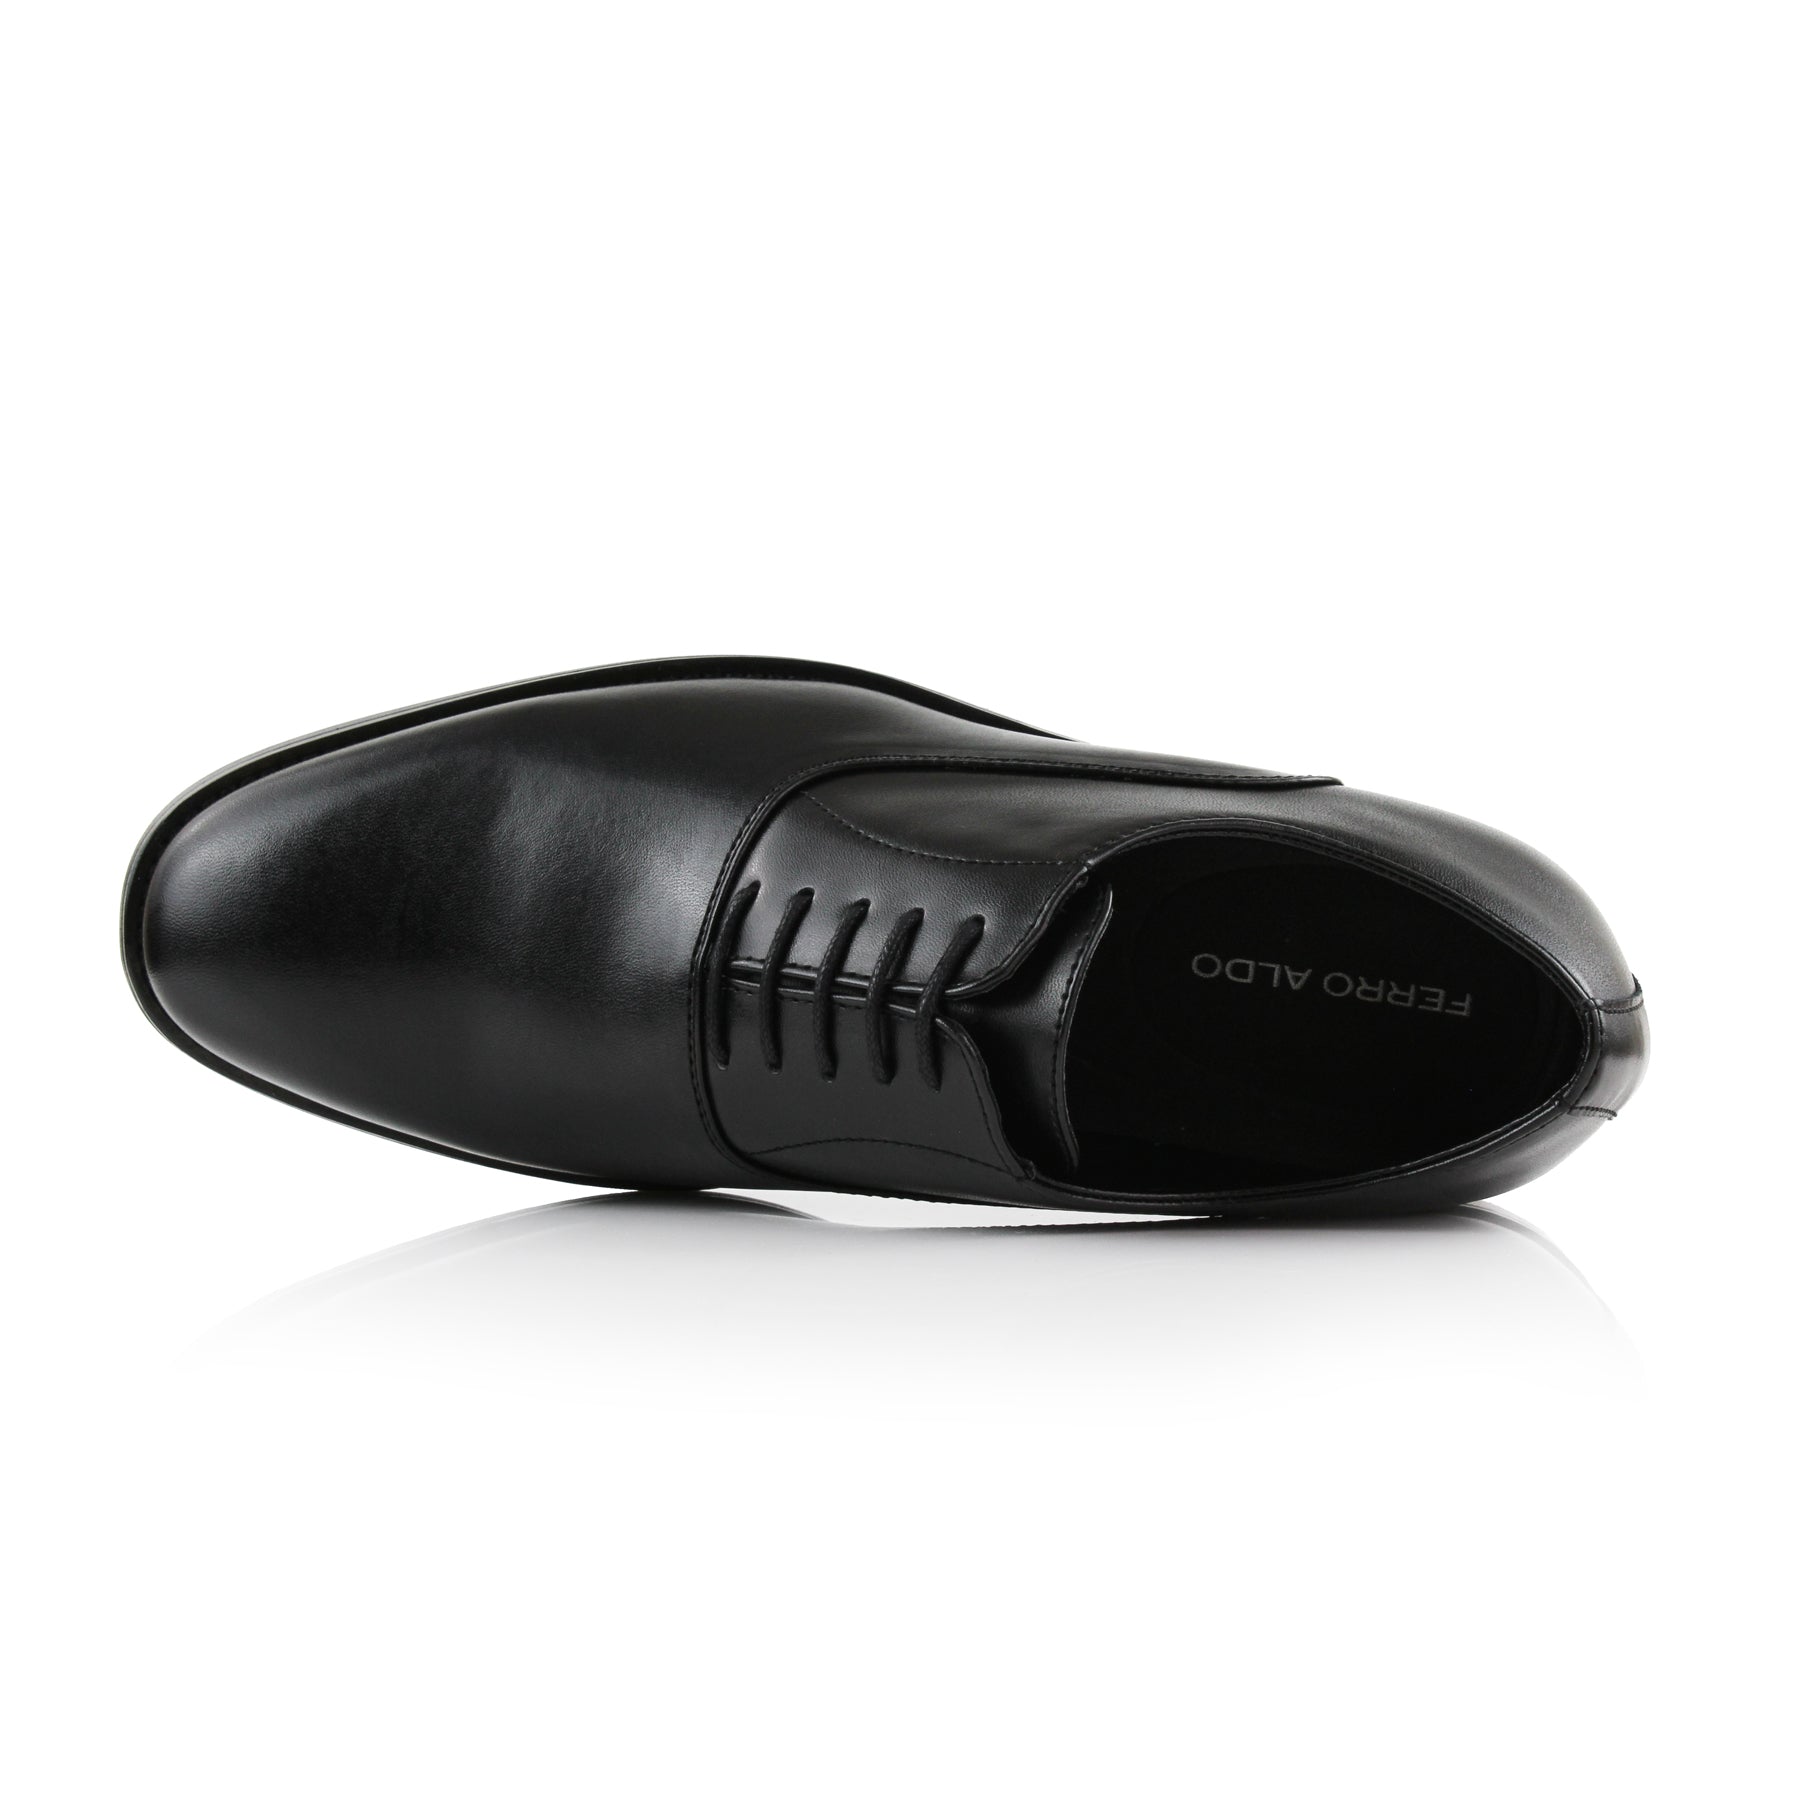 Synthetic Leather Oxfords | George by Ferro Aldo | Conal Footwear | Top-Down Angle View